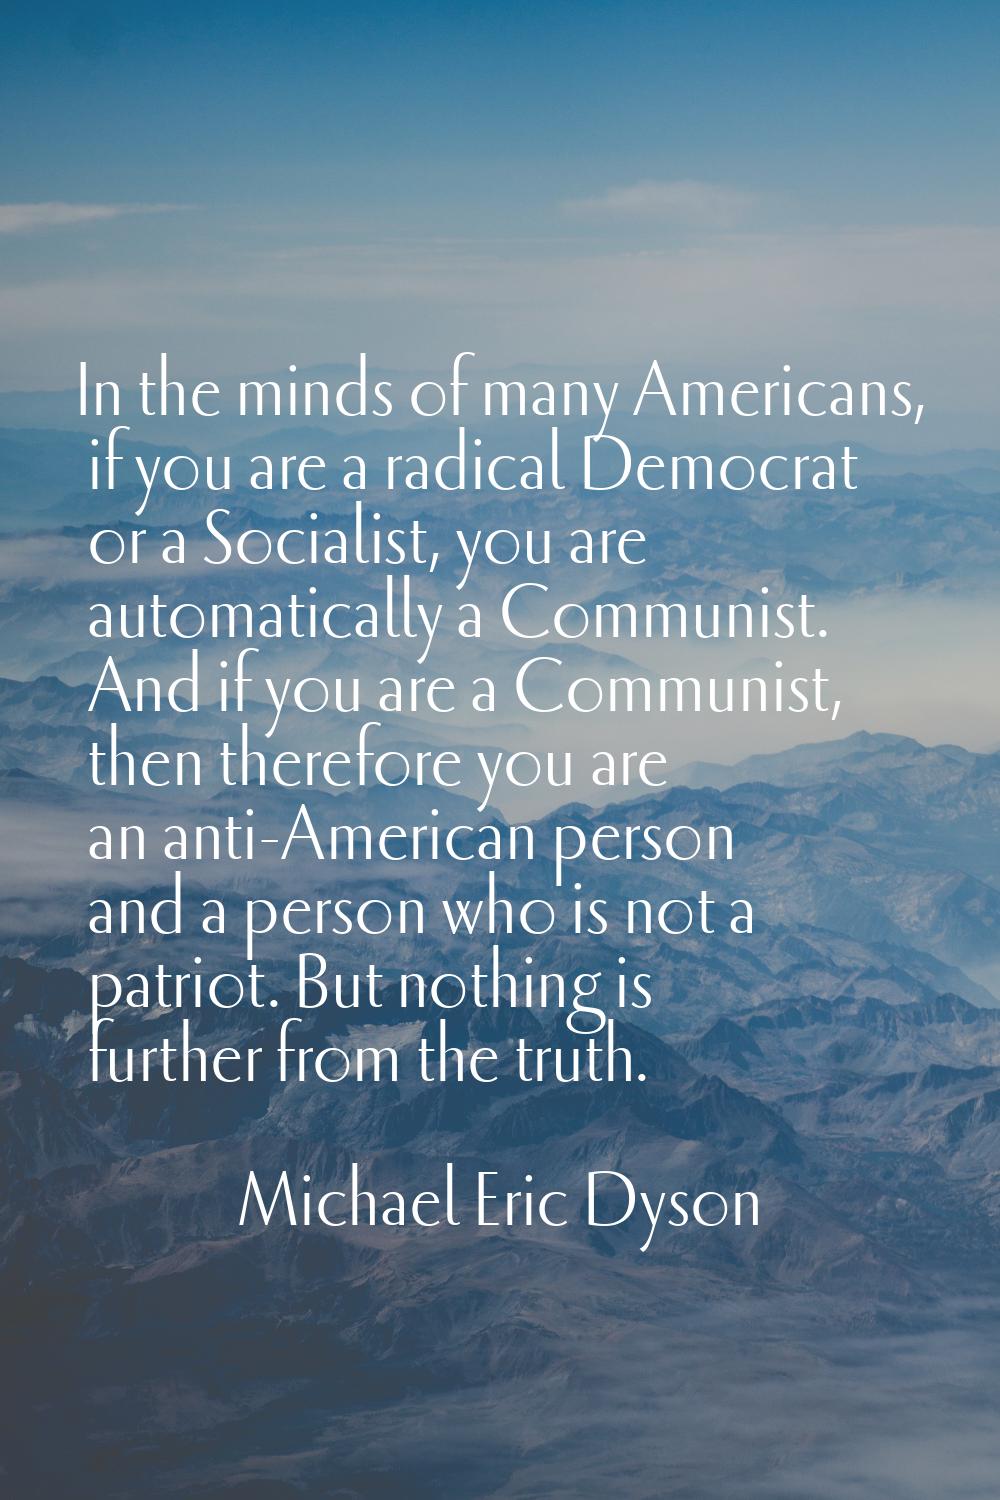 In the minds of many Americans, if you are a radical Democrat or a Socialist, you are automatically